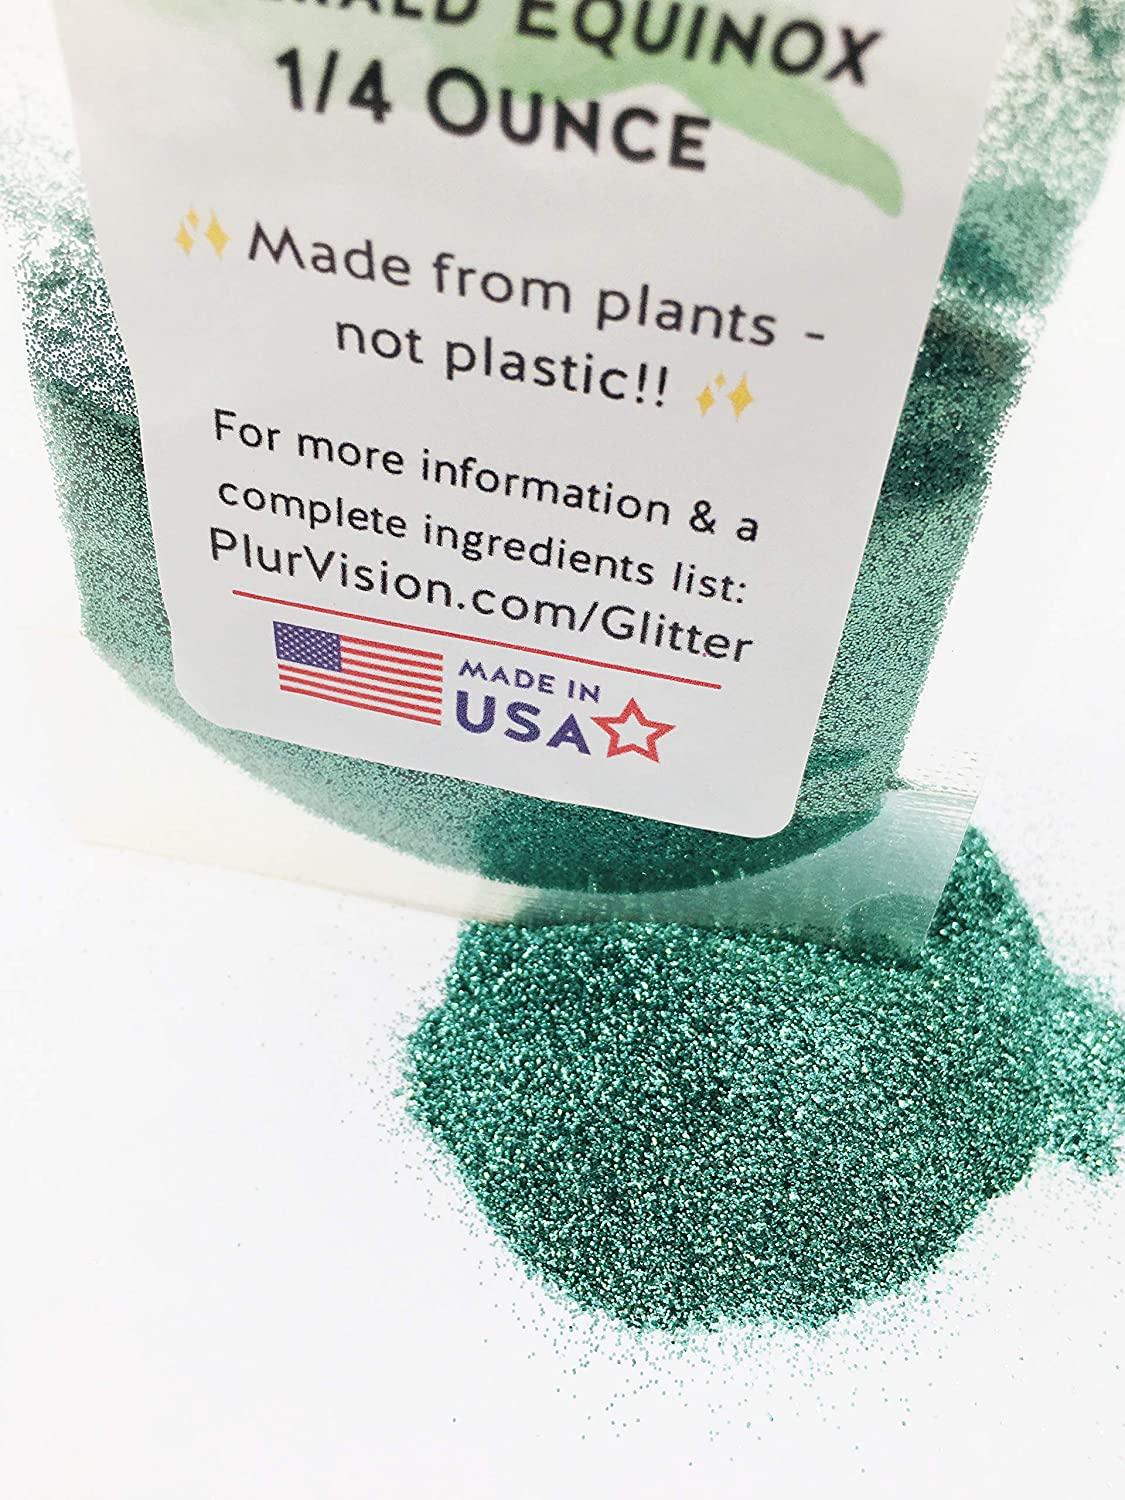 Emerald Equinox Biodegradable Glitter 1/4 Ounce - Made from Plant Cellulose, Earth Friendly. Perfect for Body, Cosmetics, Crafts, DIY Projects. Can be Mixed with Lotions, Gels, Oils, Face 0.25 Ounce of 1) Emerald